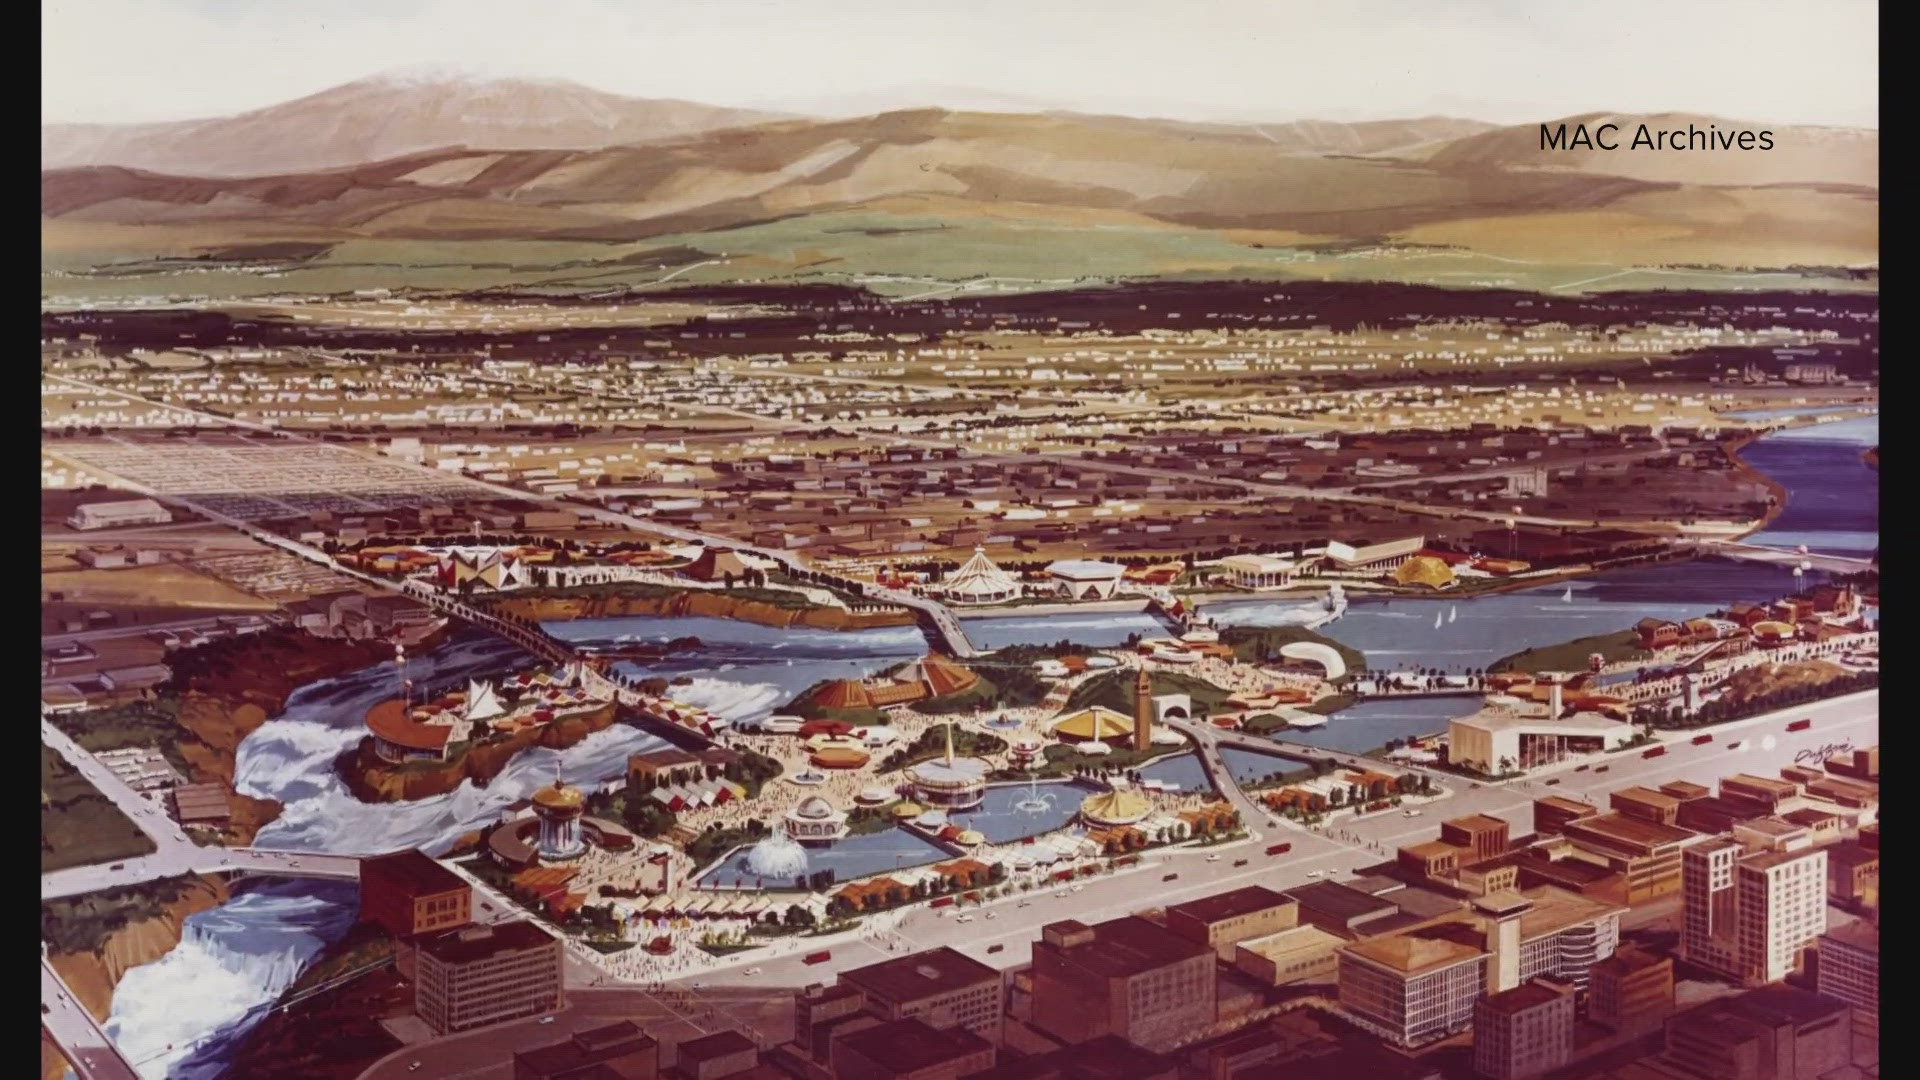 The 1974 World's Fair brought major change to downtown Spokane, but that change didn't happen overnight.